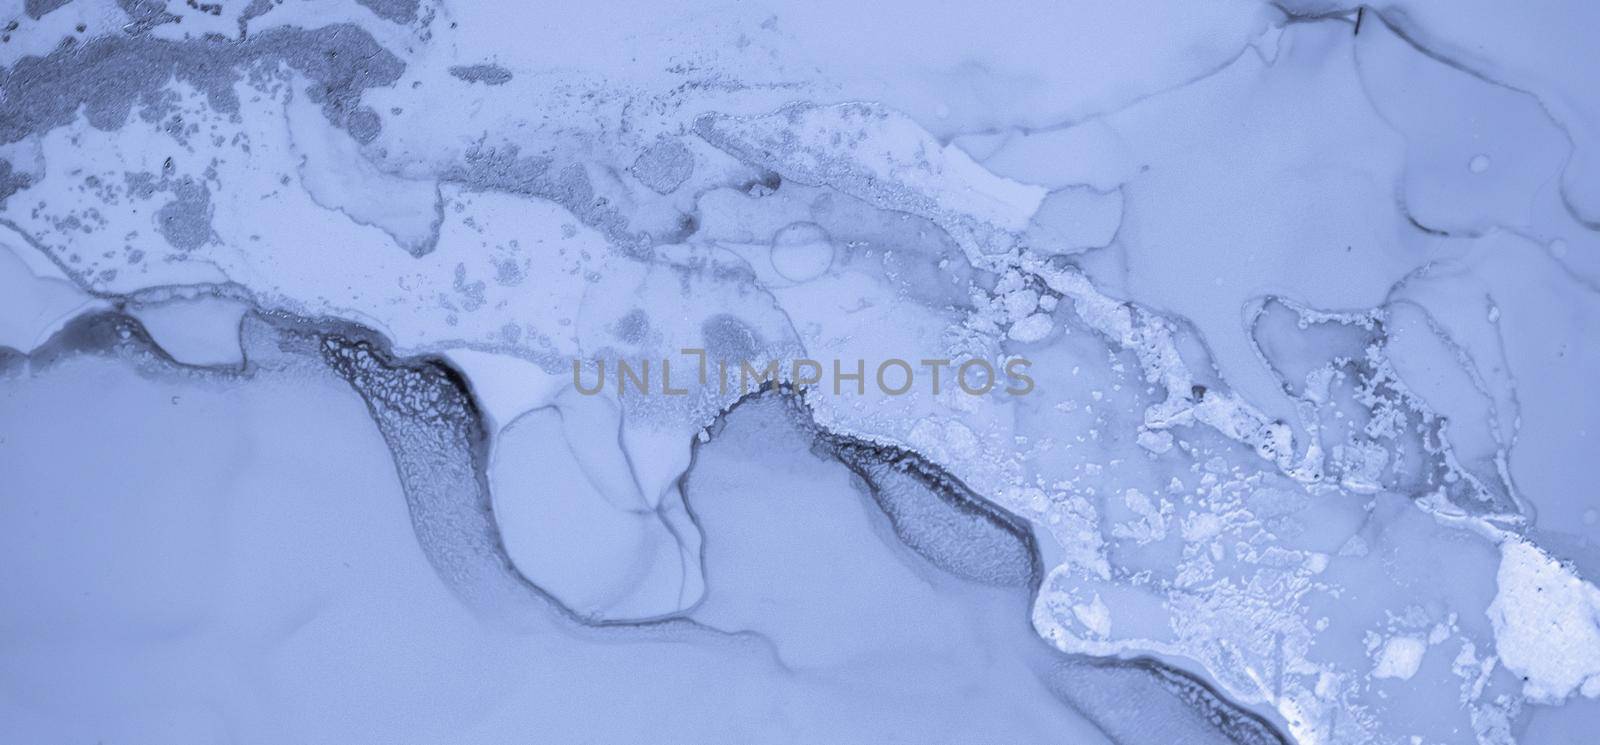 Ink Colours Mix. Oil Wave Illustration. Indigo Alcohol Texture. Mixing Inks. Snow Light Painting. Blue Fluid Effect. Art Abstract Pattern. Contemporary Creative Paper. Marble Ink Colours Mix Water.